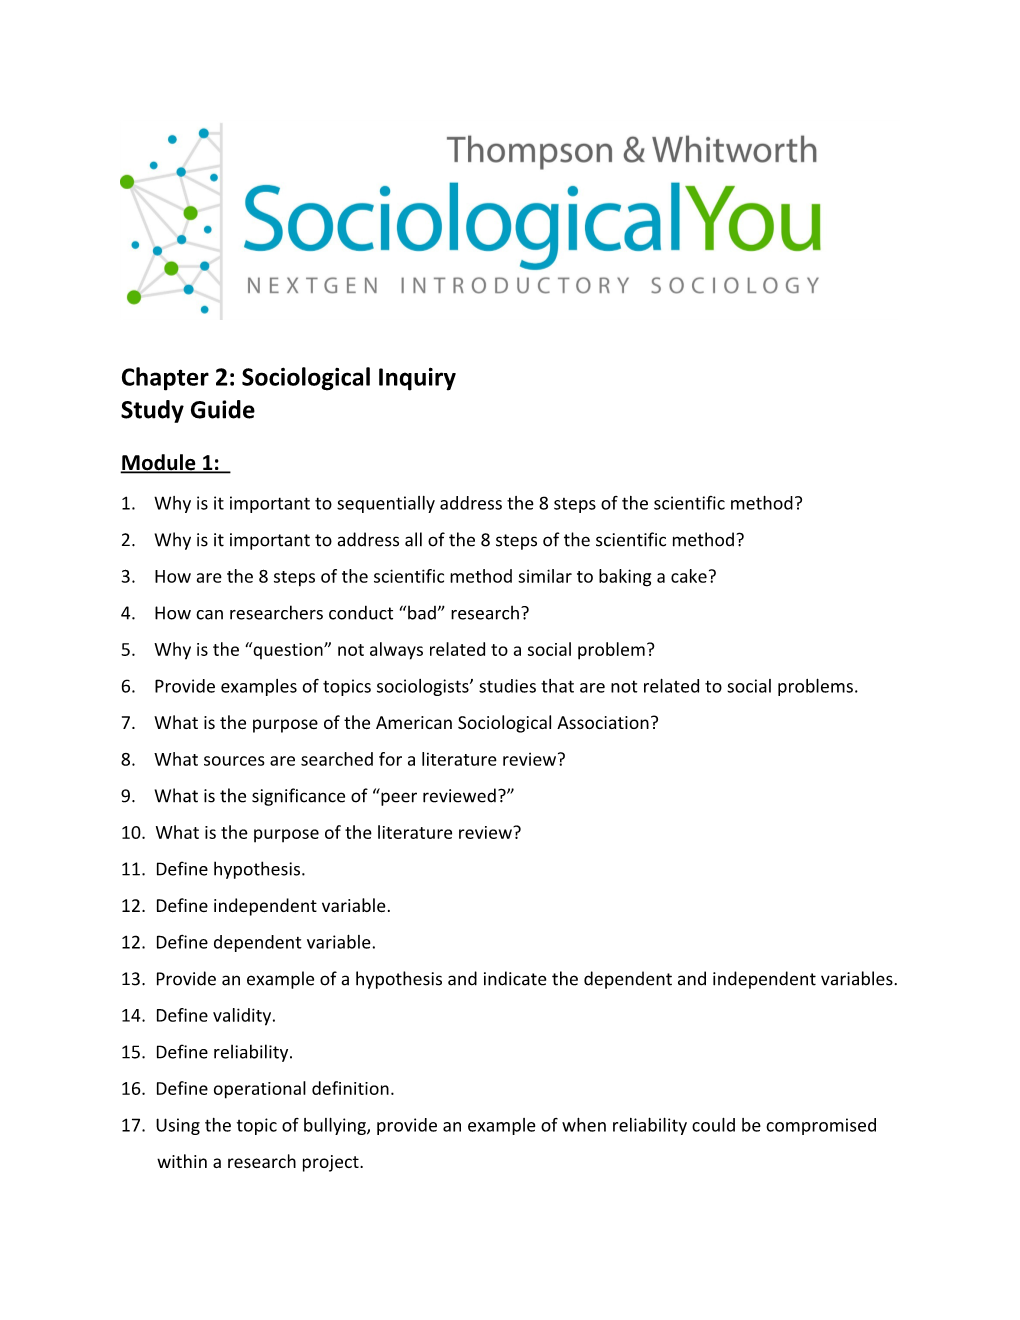 5. Why Is the Question Not Always Related to a Social Problem?